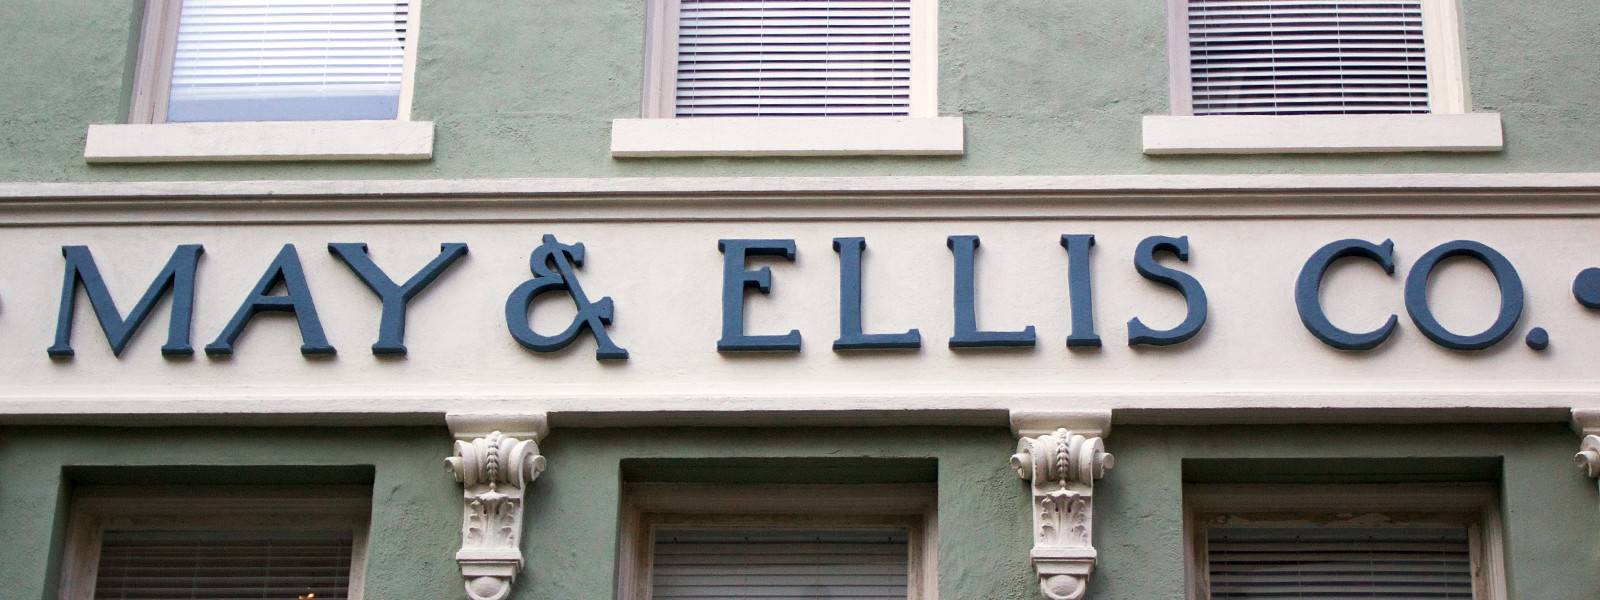 Storefront type and signage for May & Ellis Co.